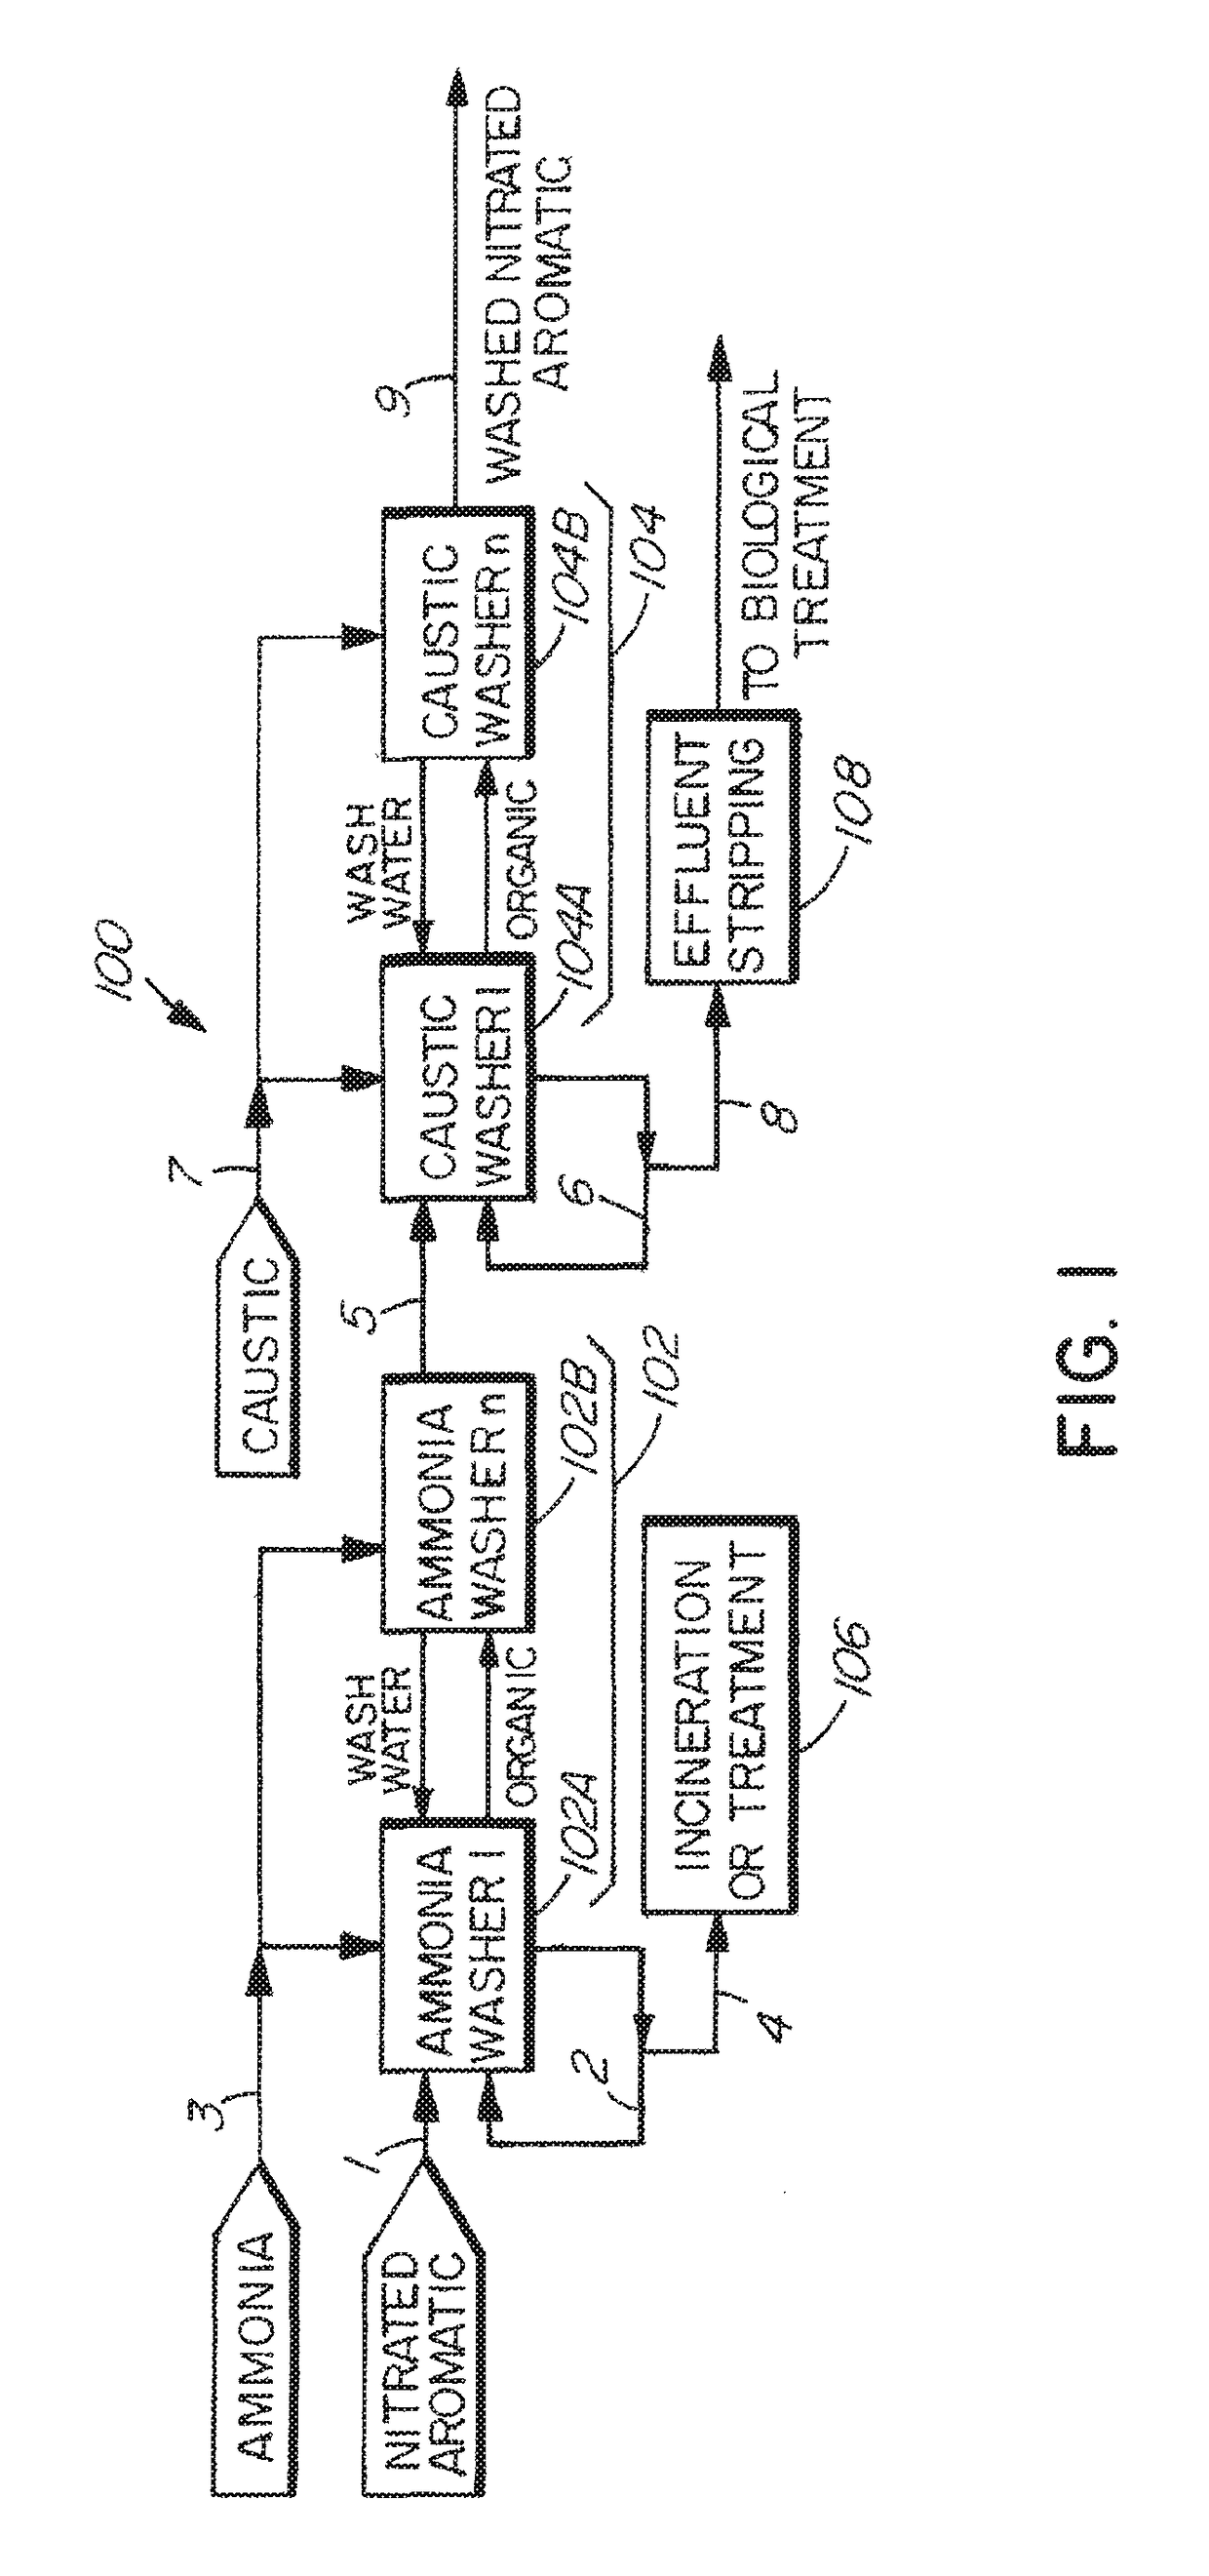 Method of purifying nitrated aromatic compounds from a nitration process